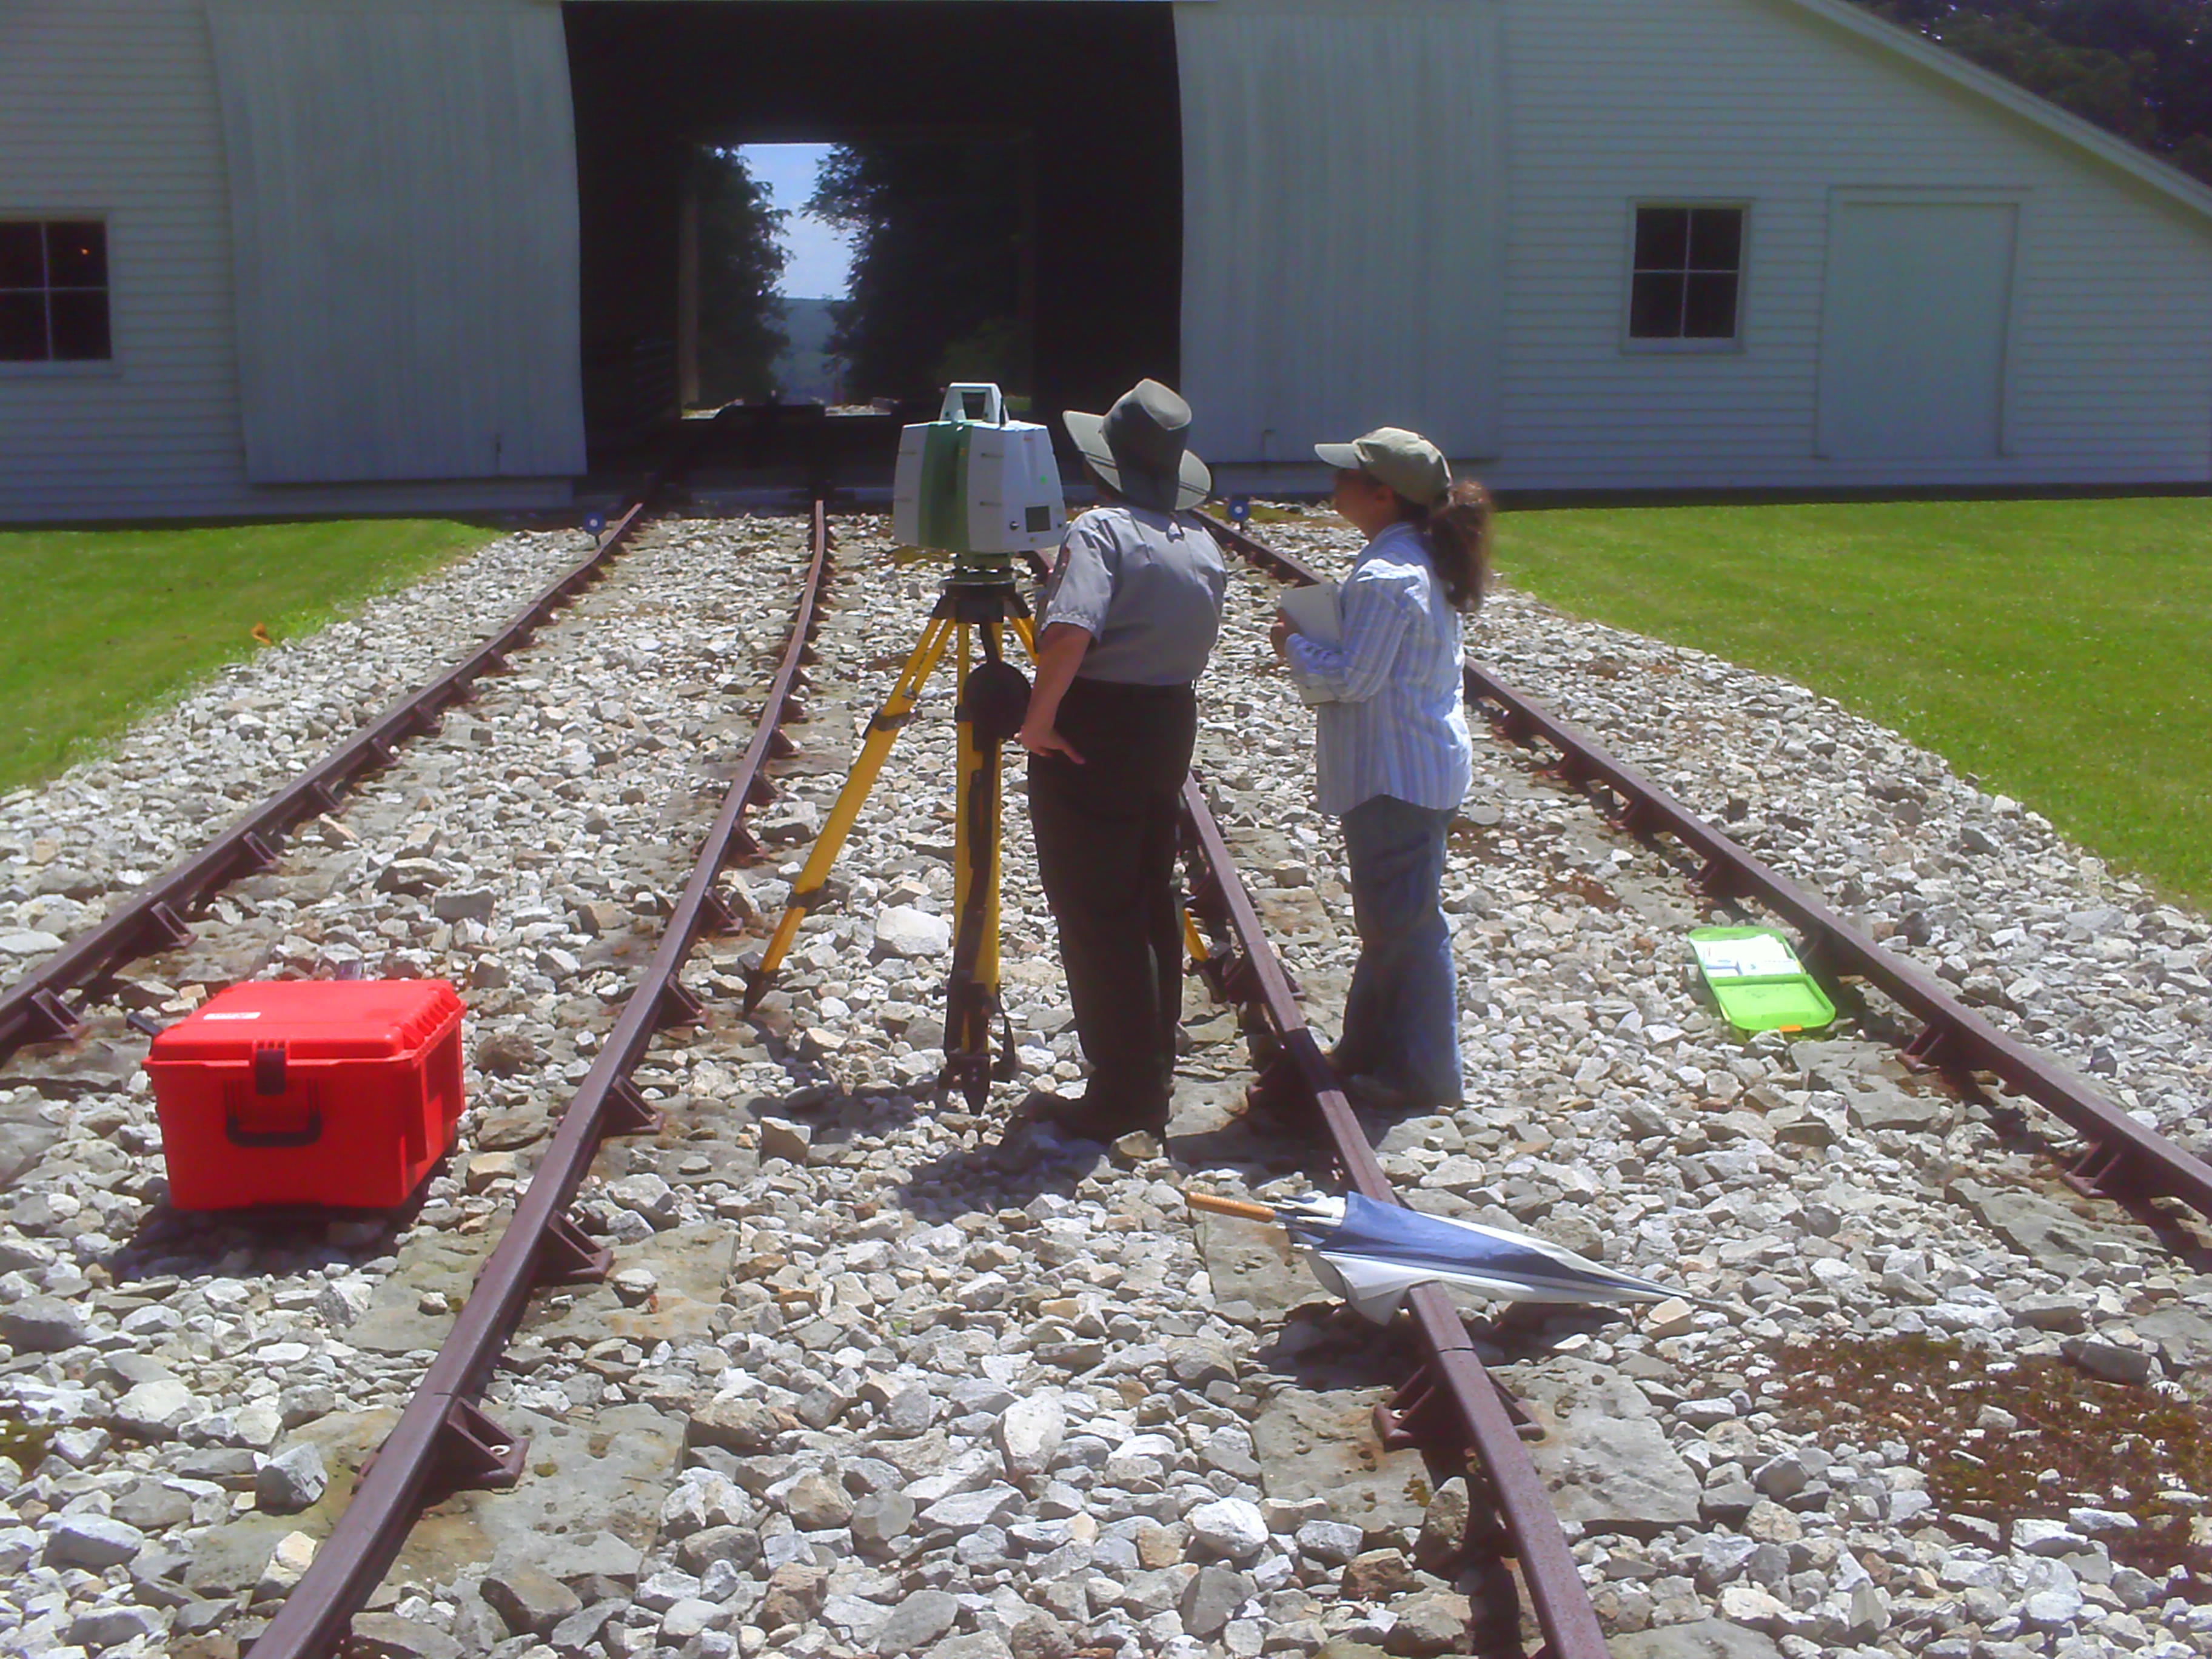 Today the Allegheny Portage Railroad National Historical Site preserves this early railroading experiment that used ten inclines to pull the canal boats